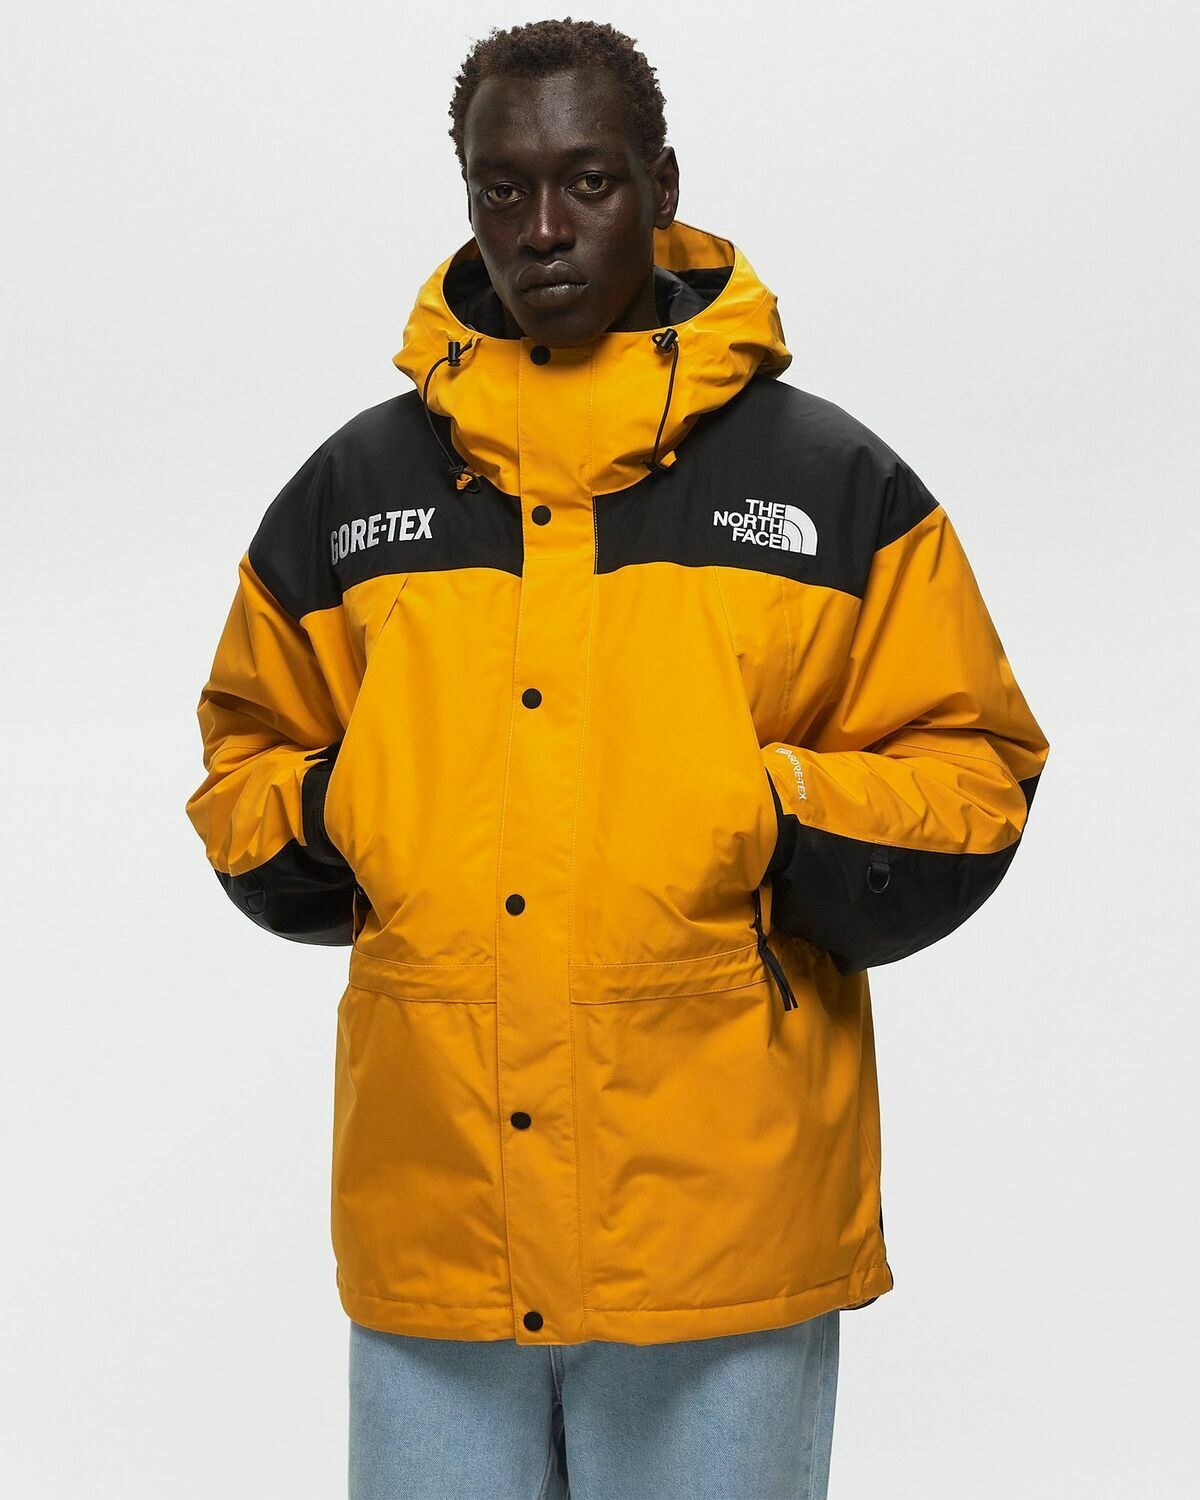 The North Face Gtx Mtn Guide Insualted Jacket Yellow - Mens - Shell Jackets  The North Face